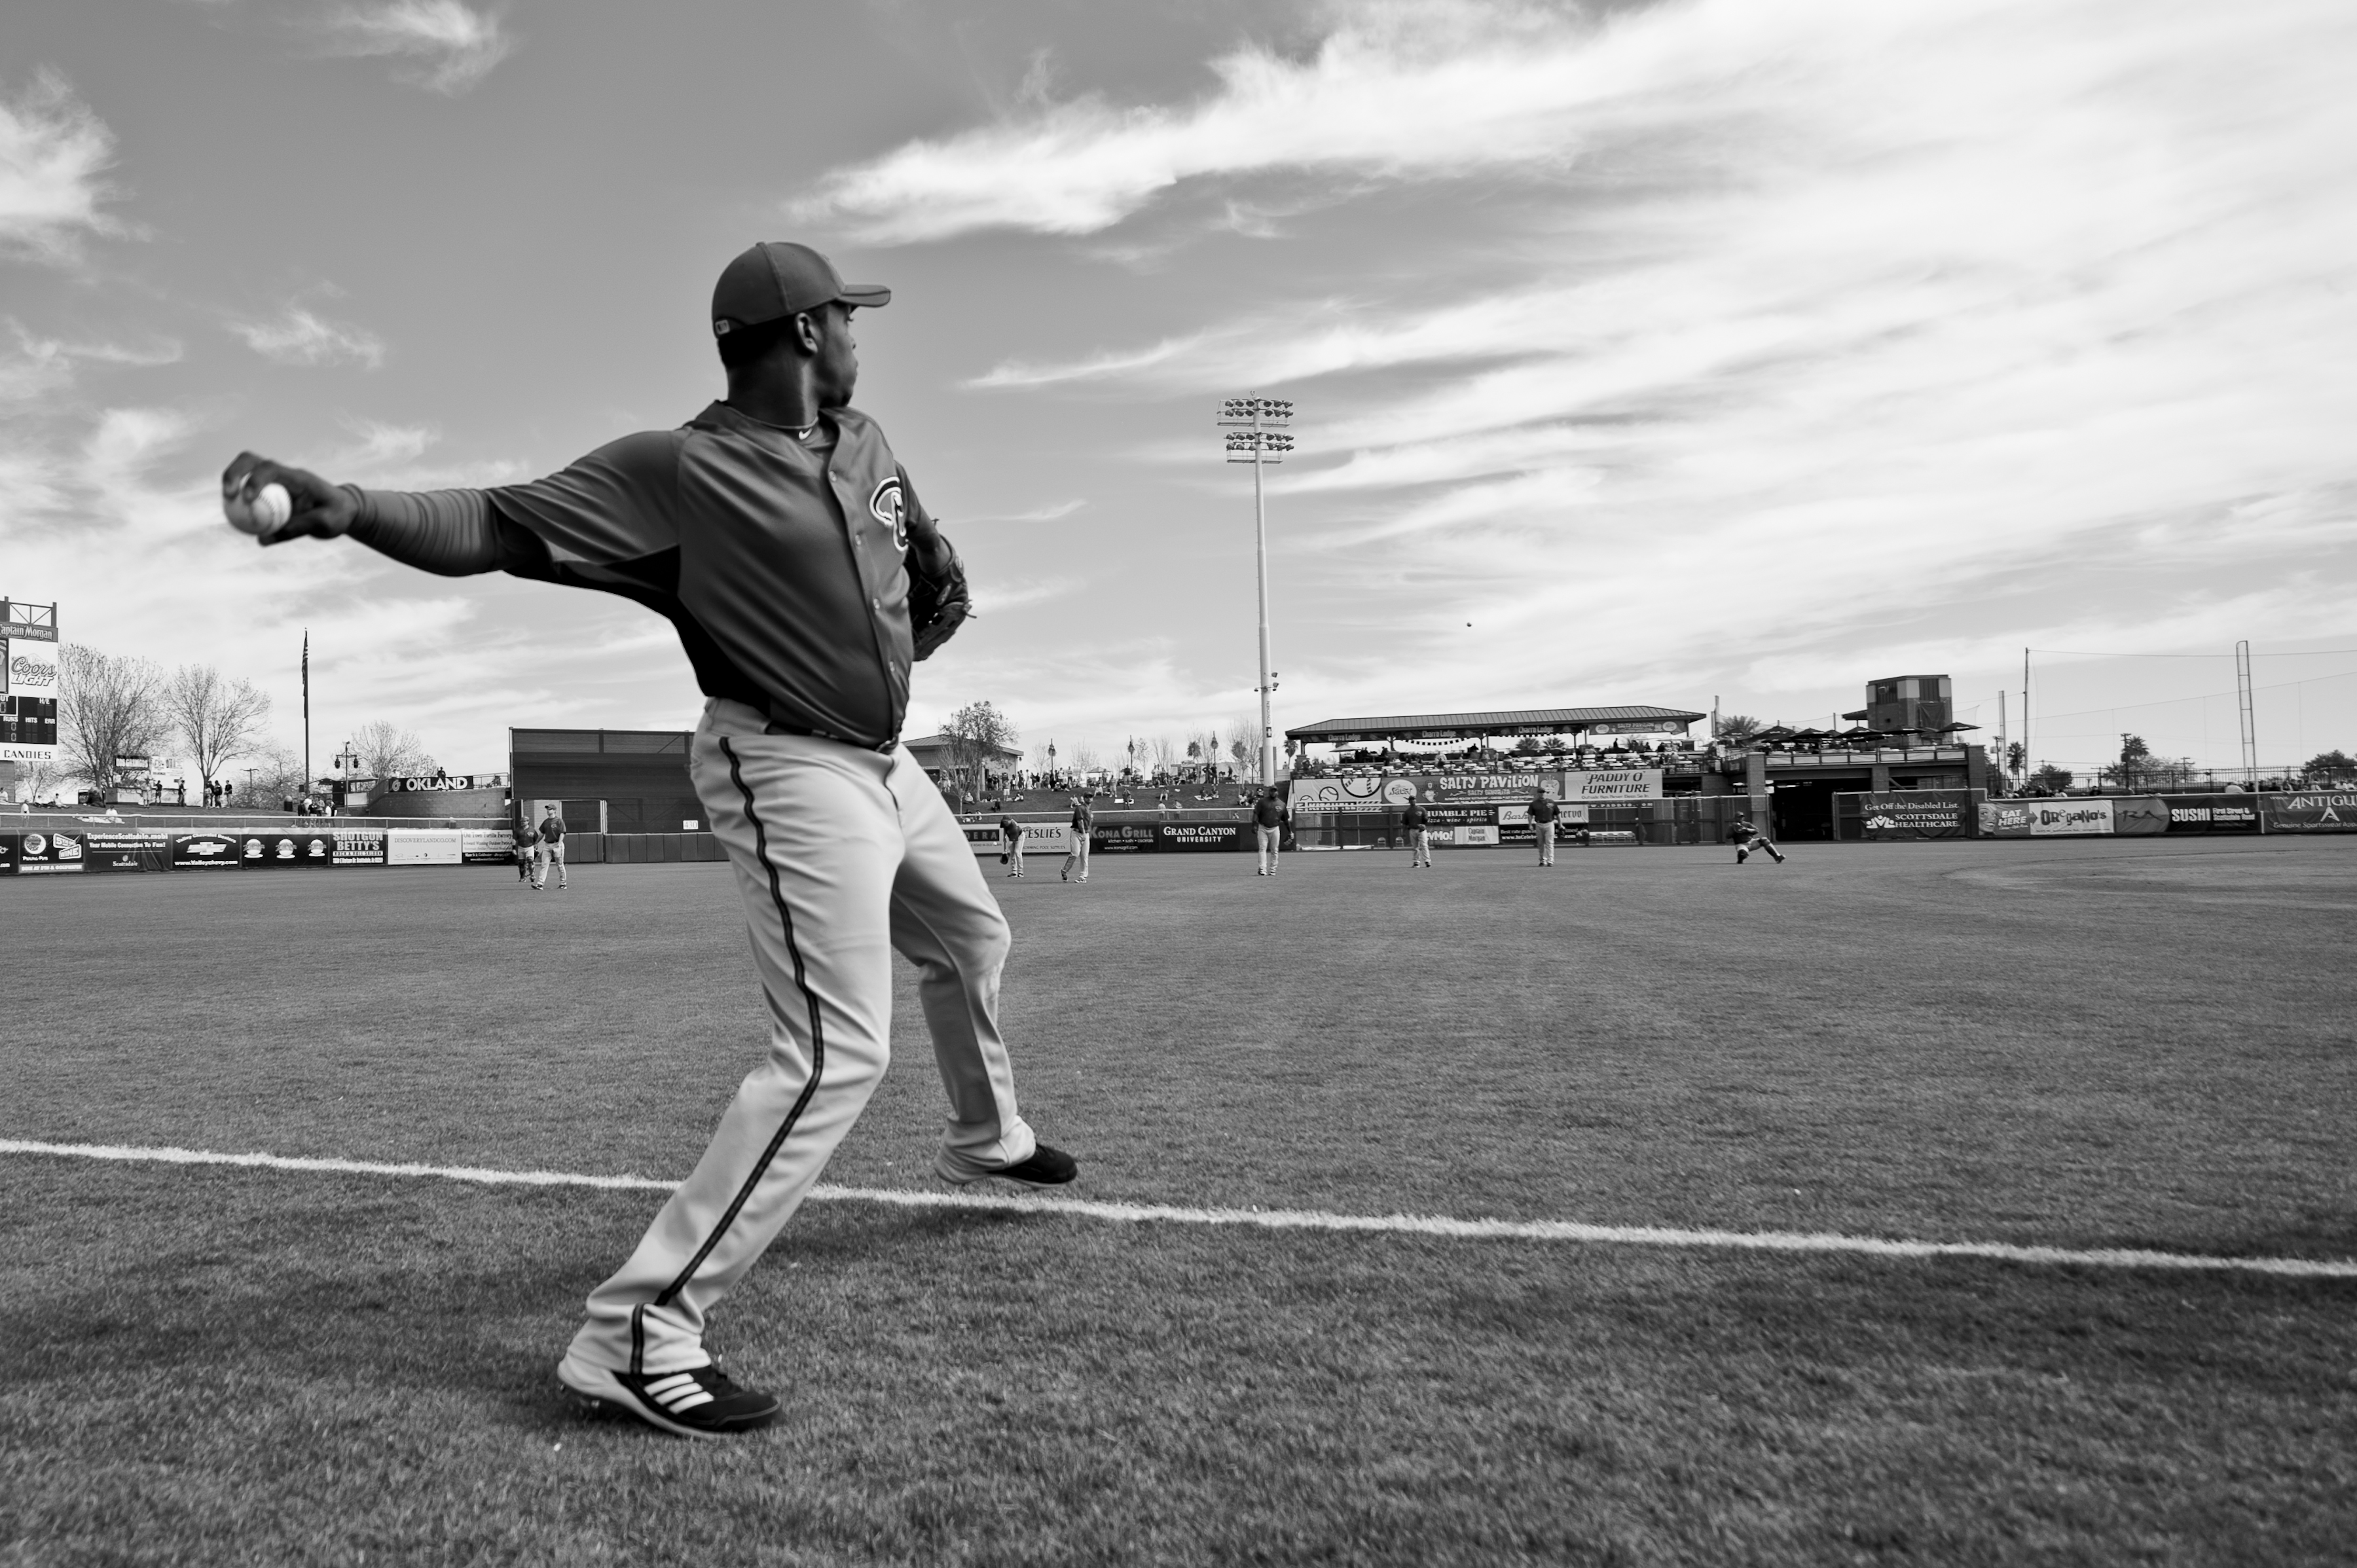 SCOTTSDALE, AZ - FEBRUARY 25: (EDITORS NOTE: Image has been converted to black and white.) )Justin Upton #10 of the Arizona Diamondbacks warms up throwing before a spring training game San Francisco Giant at Scottsdale Stadium on February 25, 2011 in Scot